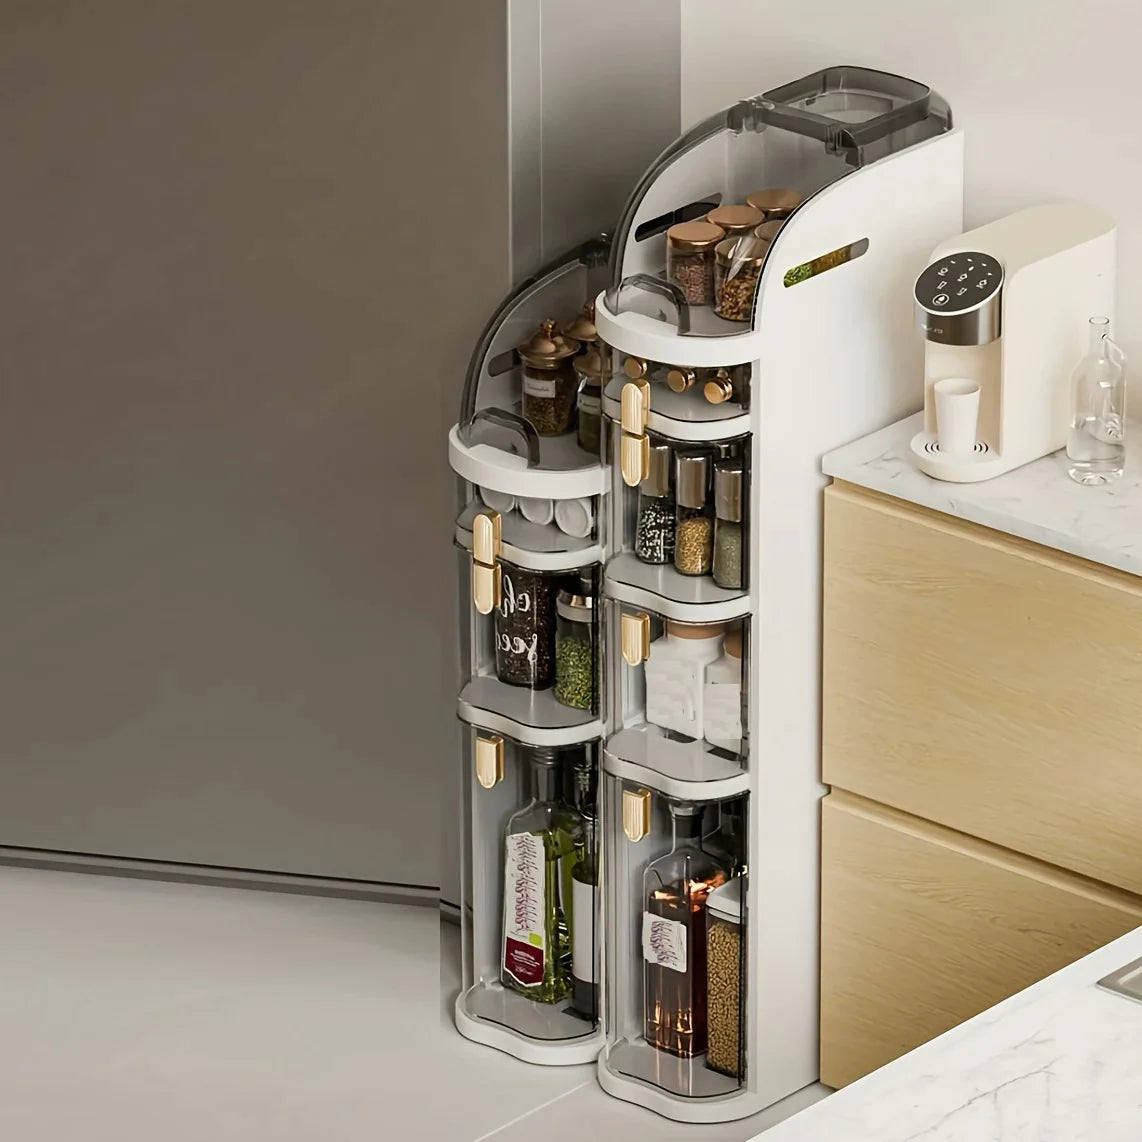 Vertical Side Storage Cabinet (Four Layer) - souqsaving.com